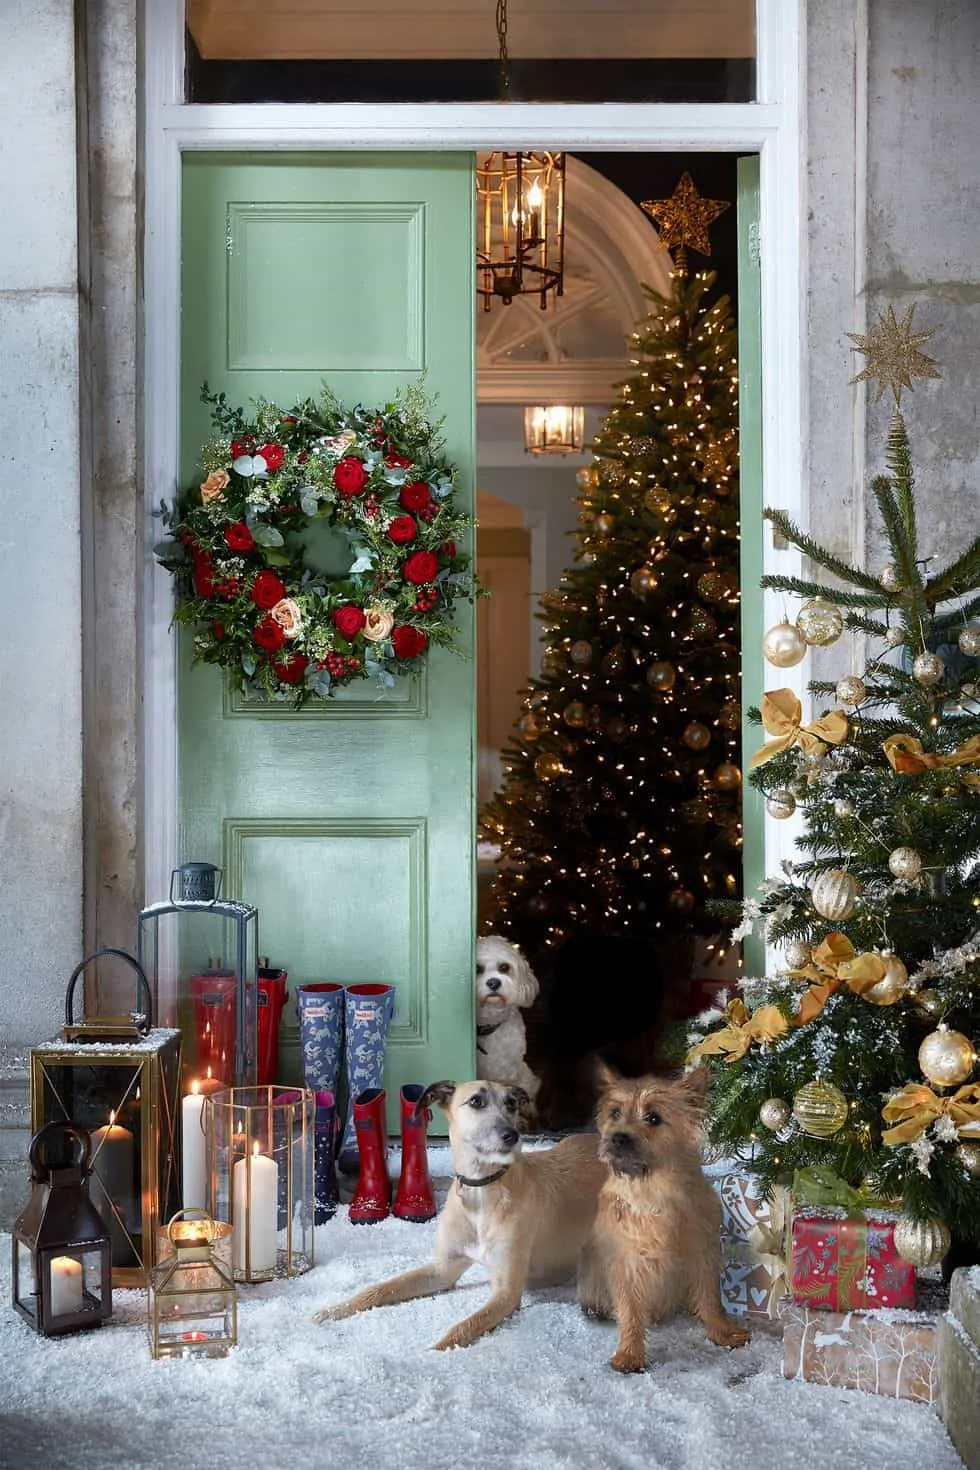 30+ Christmas Garden Ideas to Bring the Festive Spirit to Your Yard